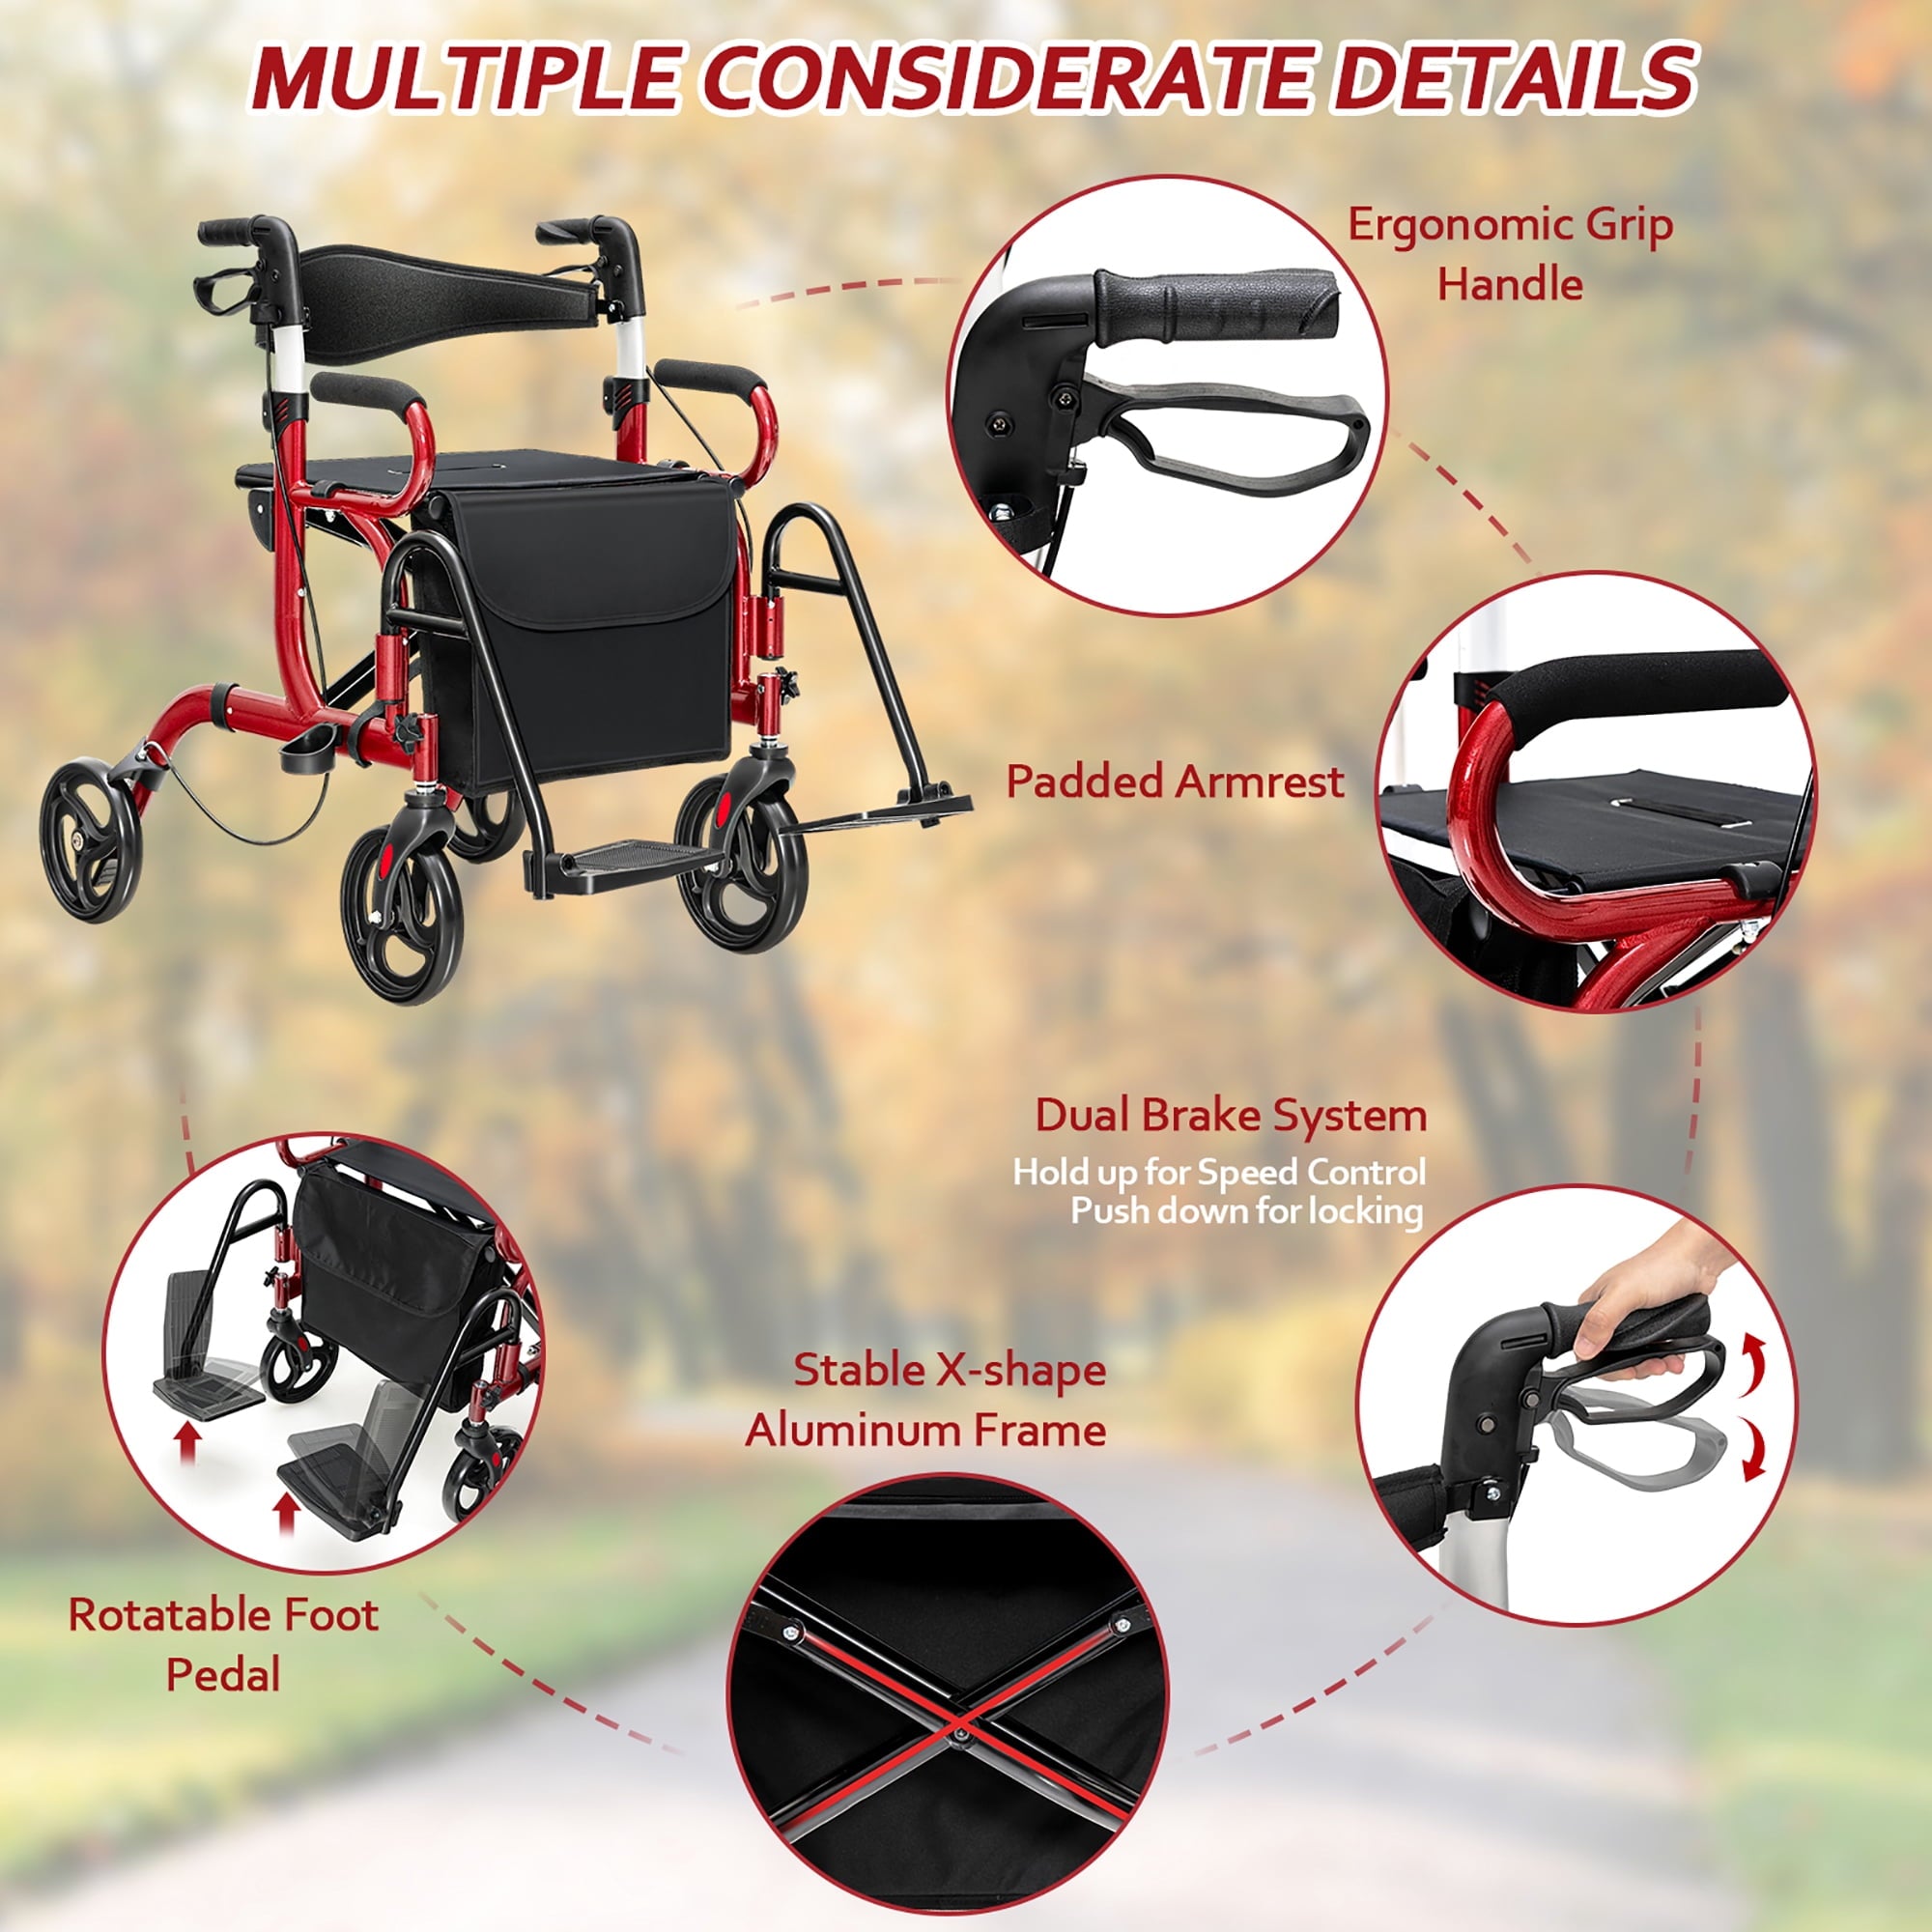 Rollator Walker with Seat Folding Walker with 8-inch Wheels Supports up to 350lbs Red